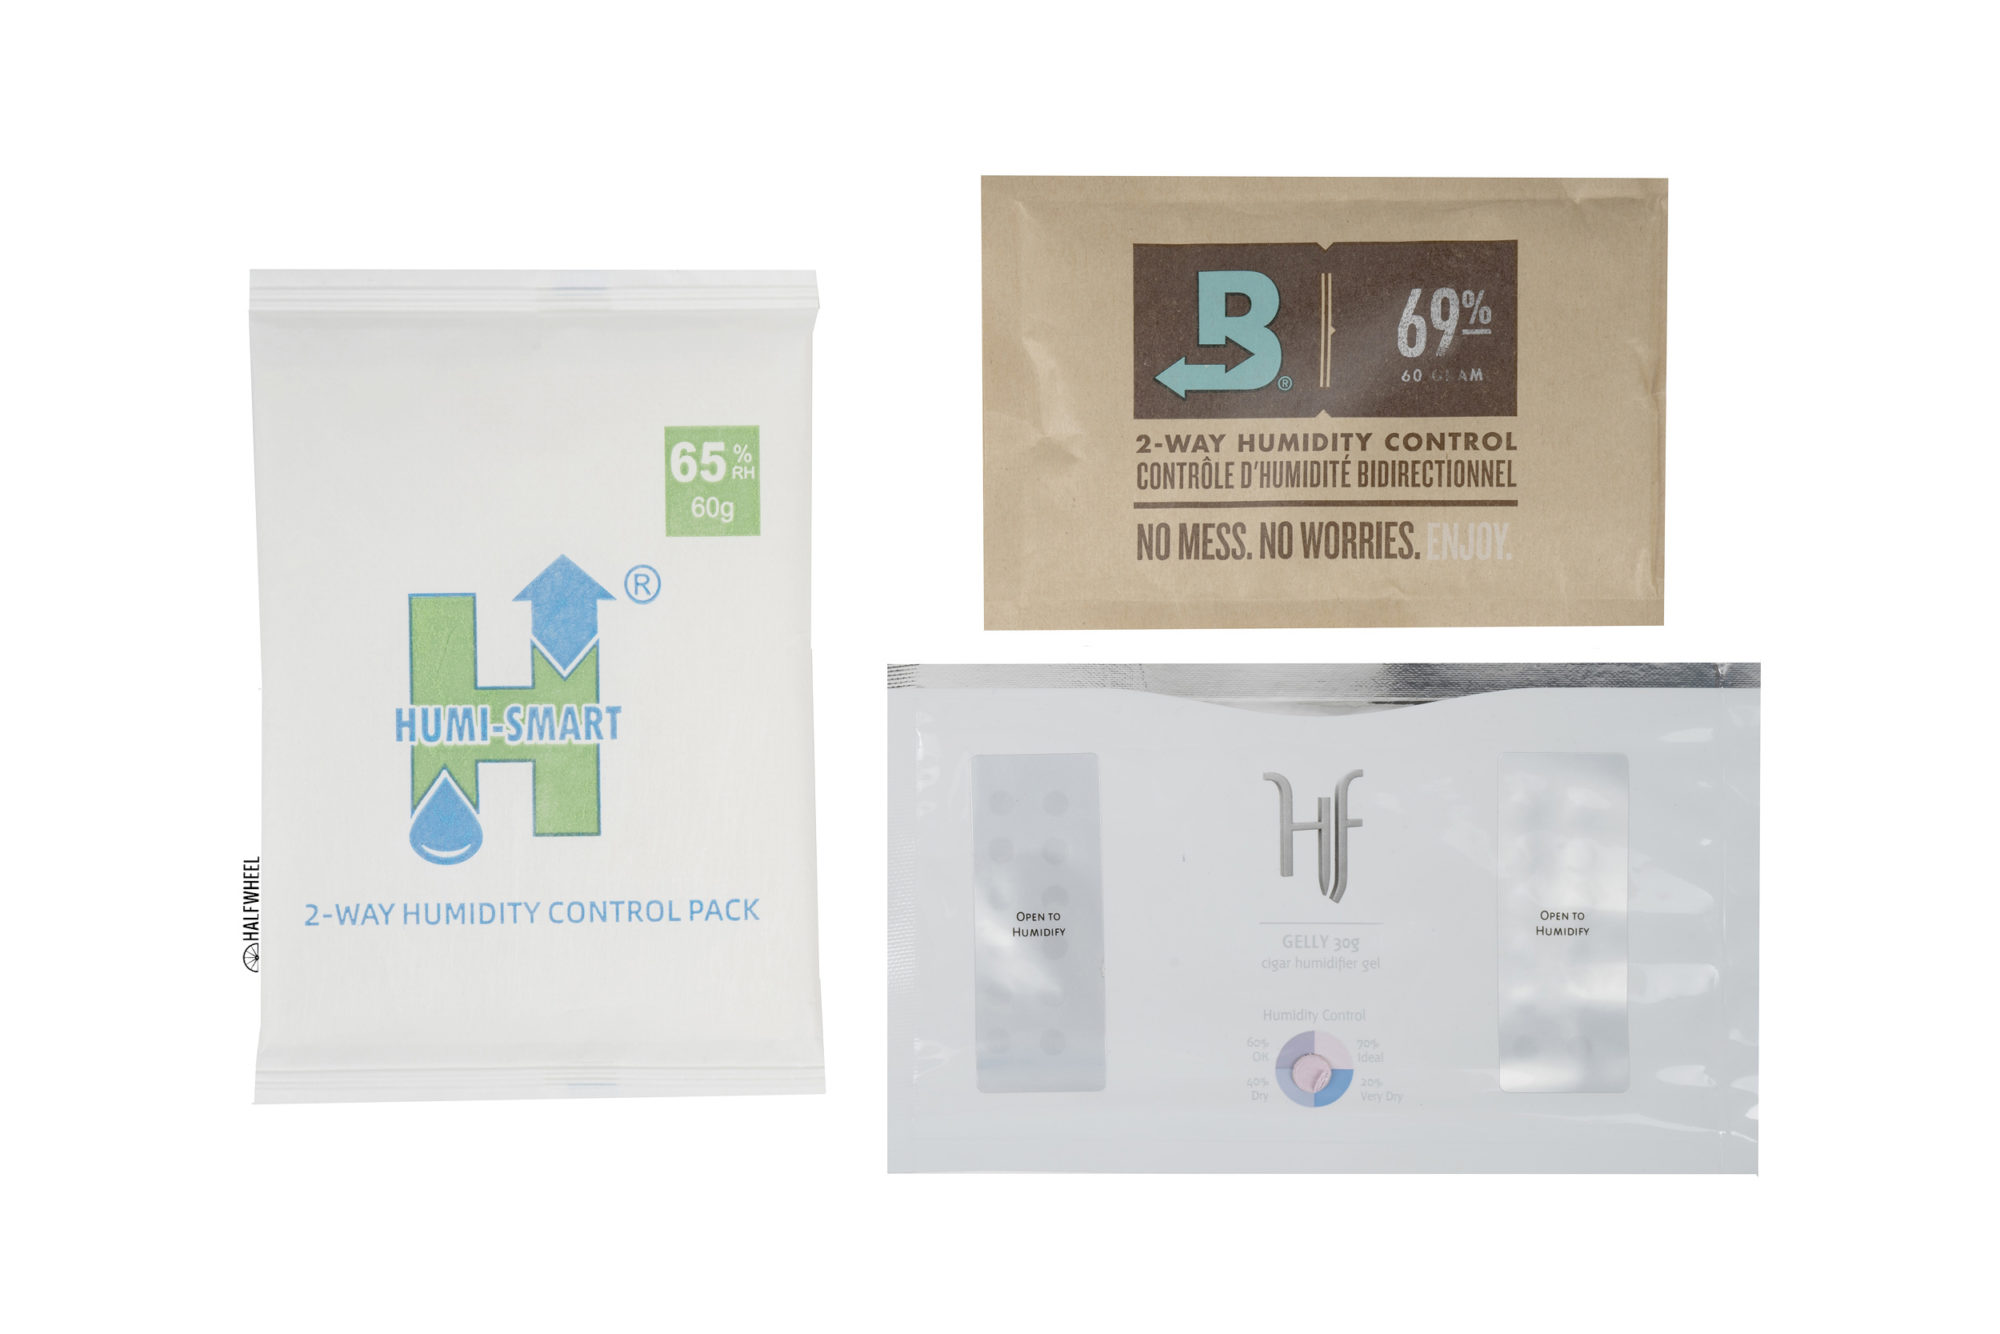 Humidity Packs (10 Pack / 8 Grams), 62-Percent RH FreshDank | 2-Way Control  That Keeps Your Product Fresher for Longer by Essential Values